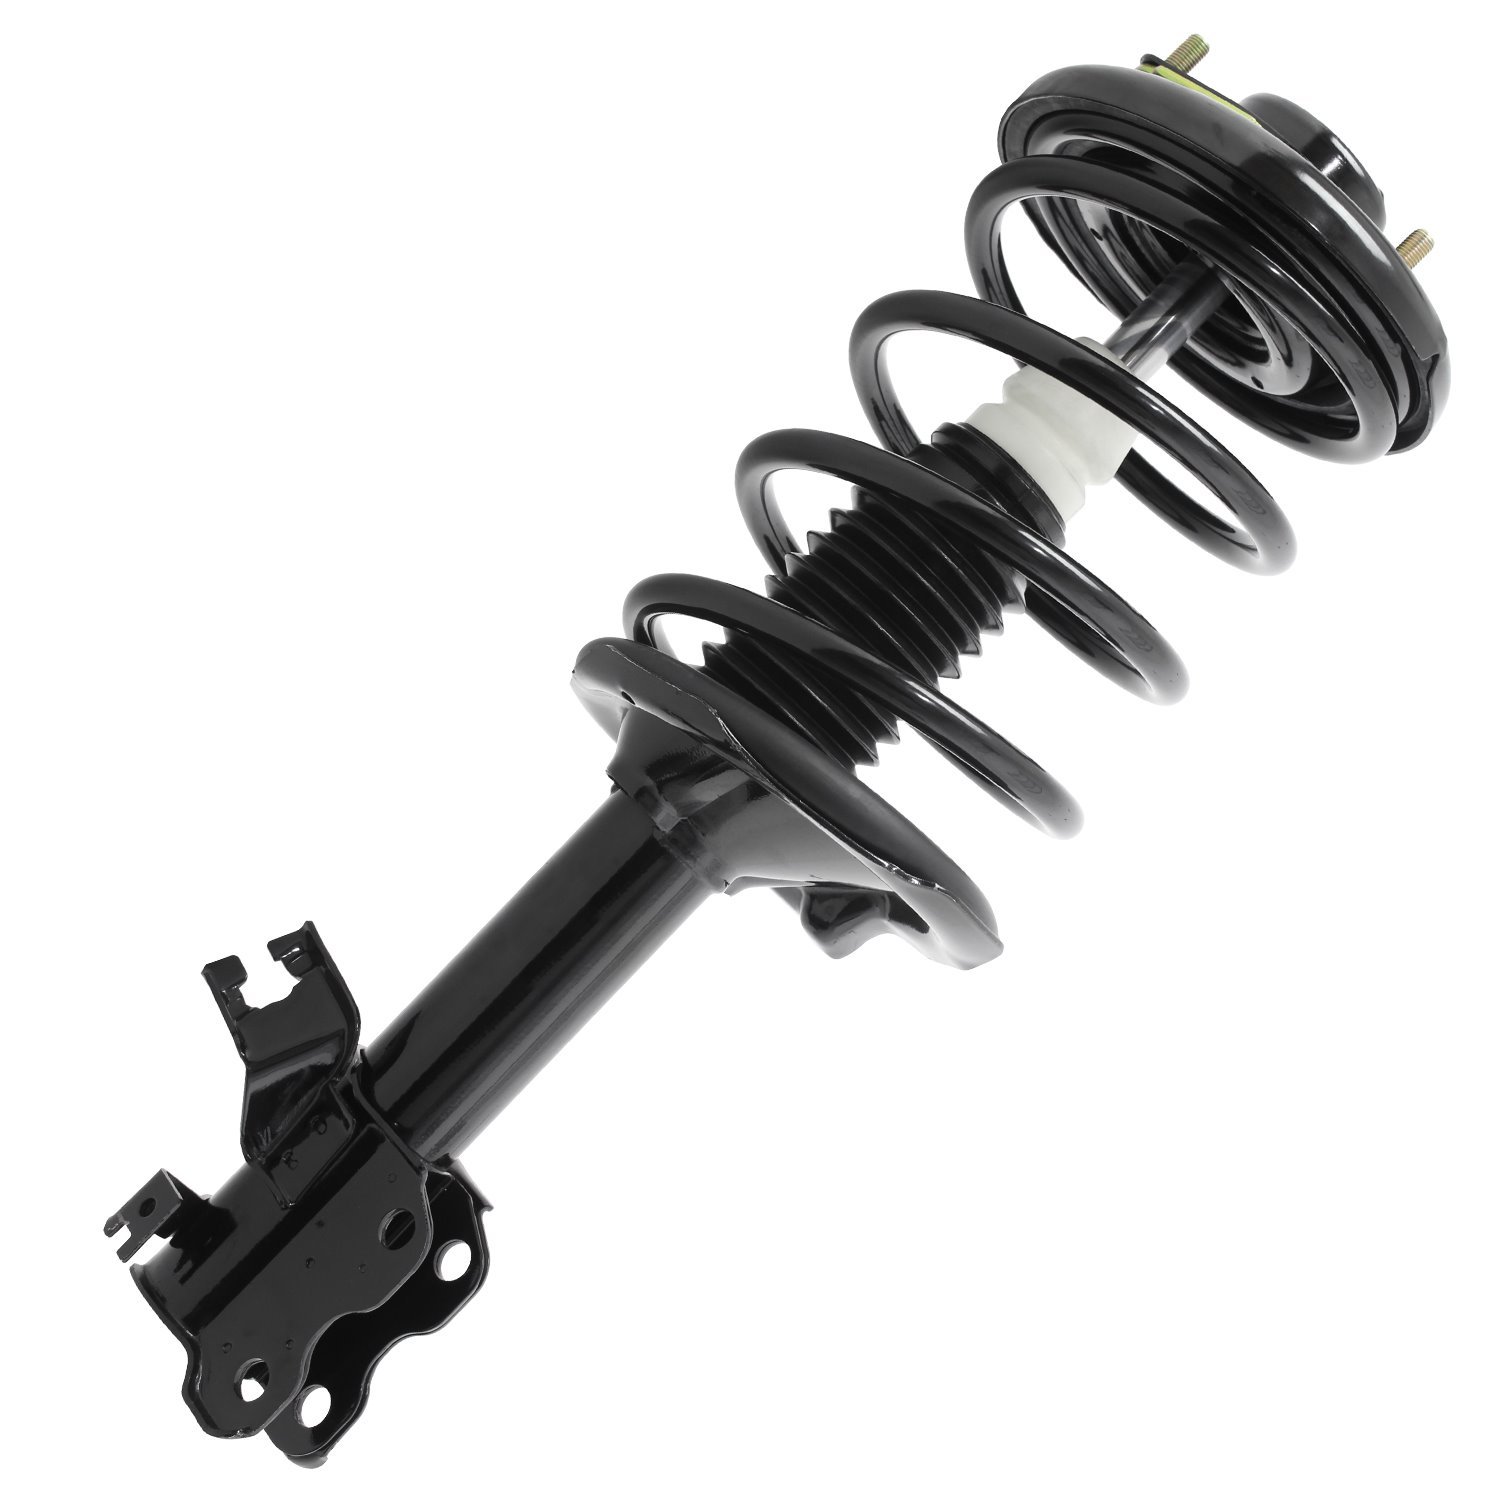 11941 Suspension Strut & Coil Spring Assembly Fits Select Nissan Maxima, Infiniti I30